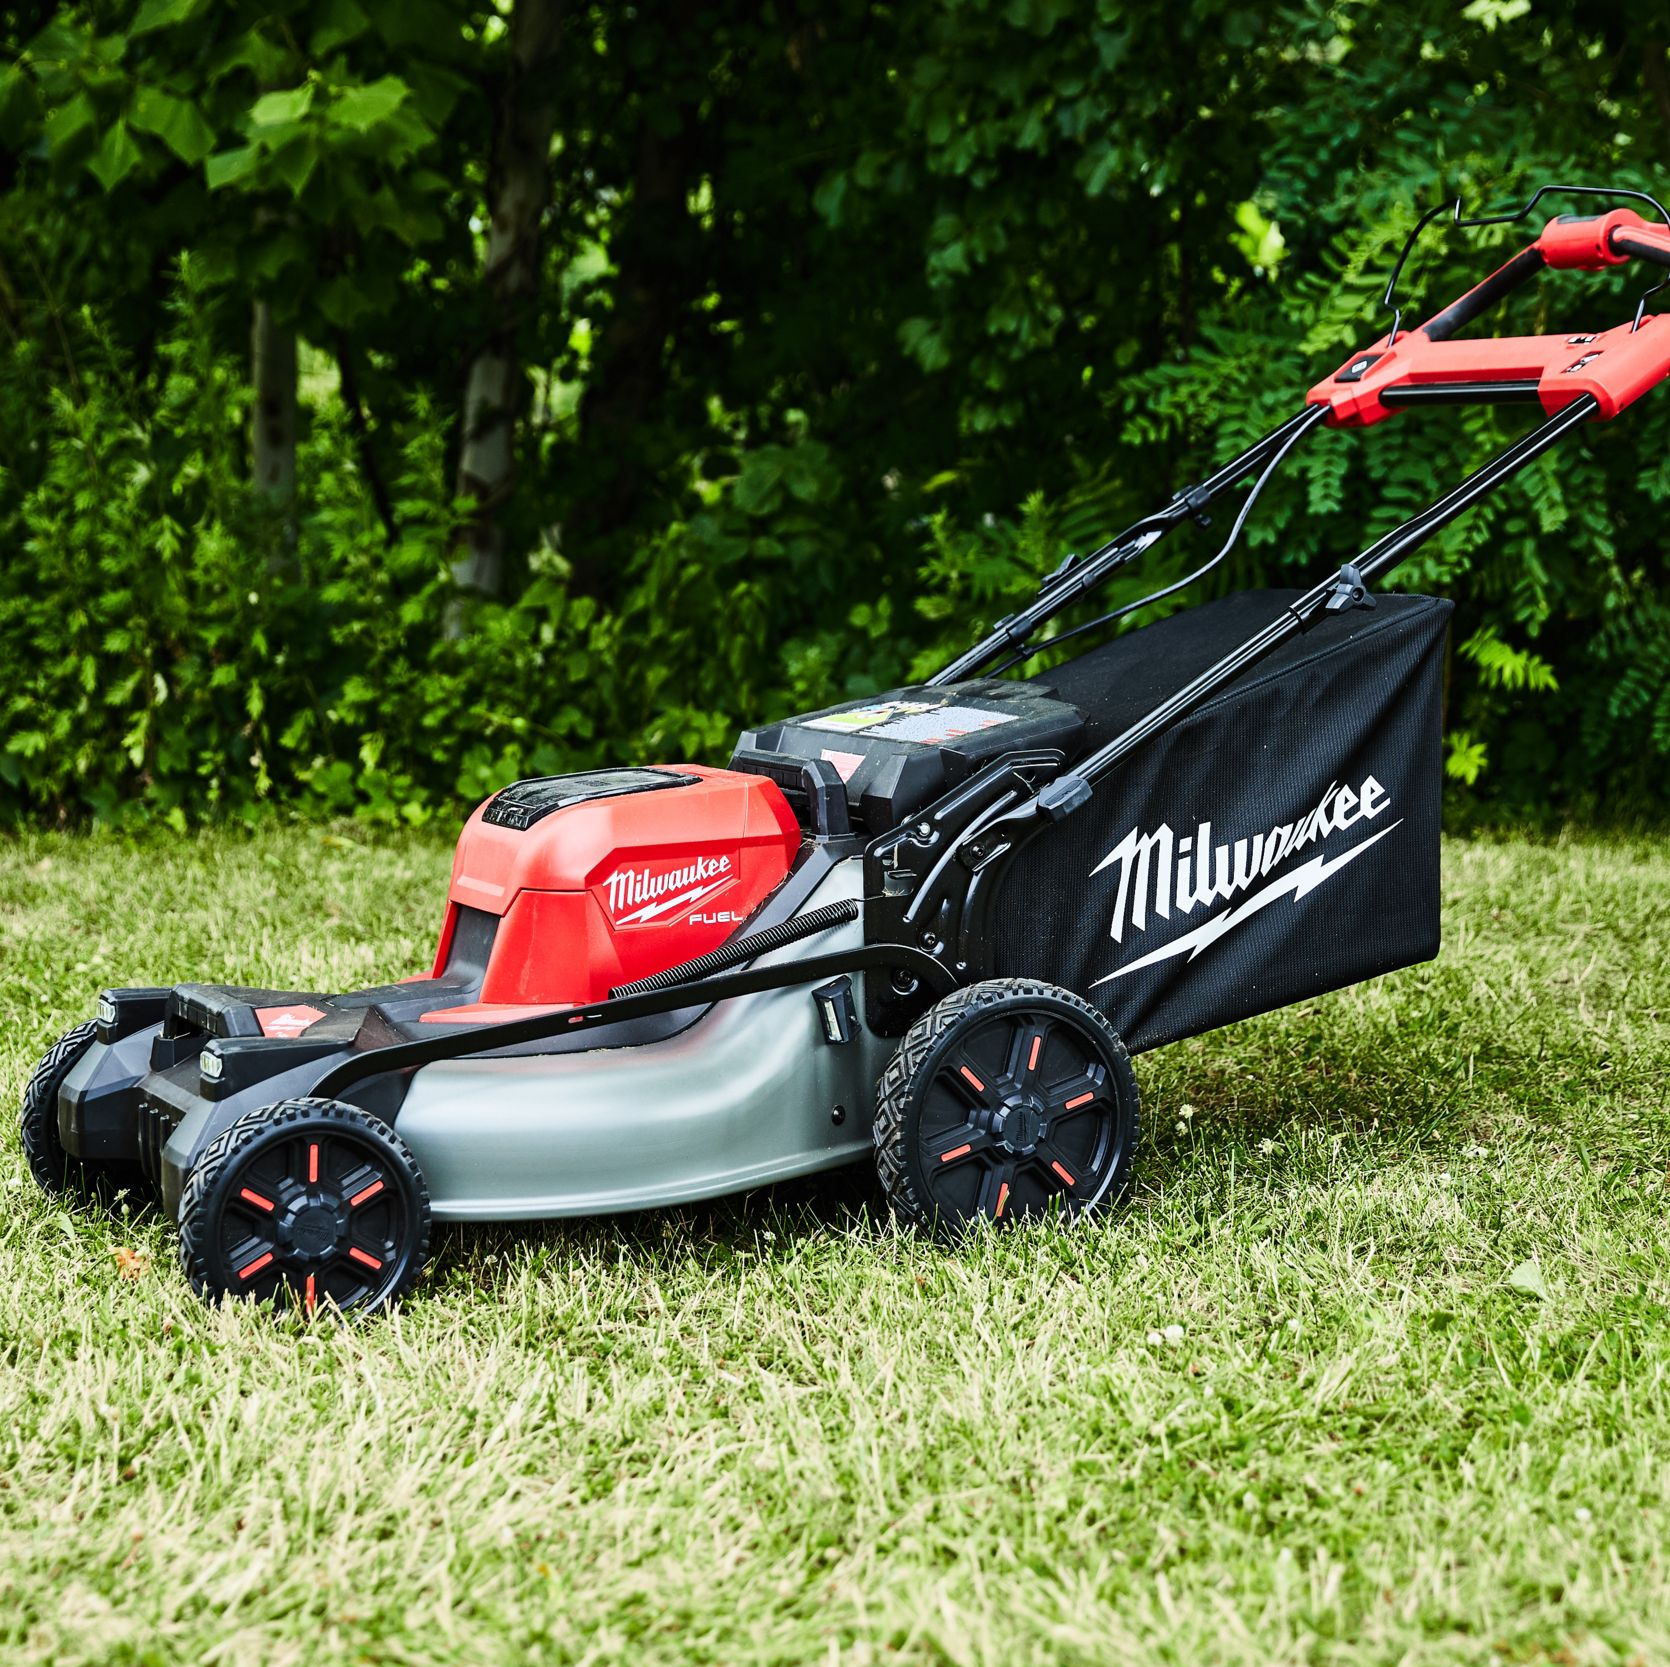 Does Milwaukee's $1,000 Electric Lawn Mower Live Up to the Brand's Claims?